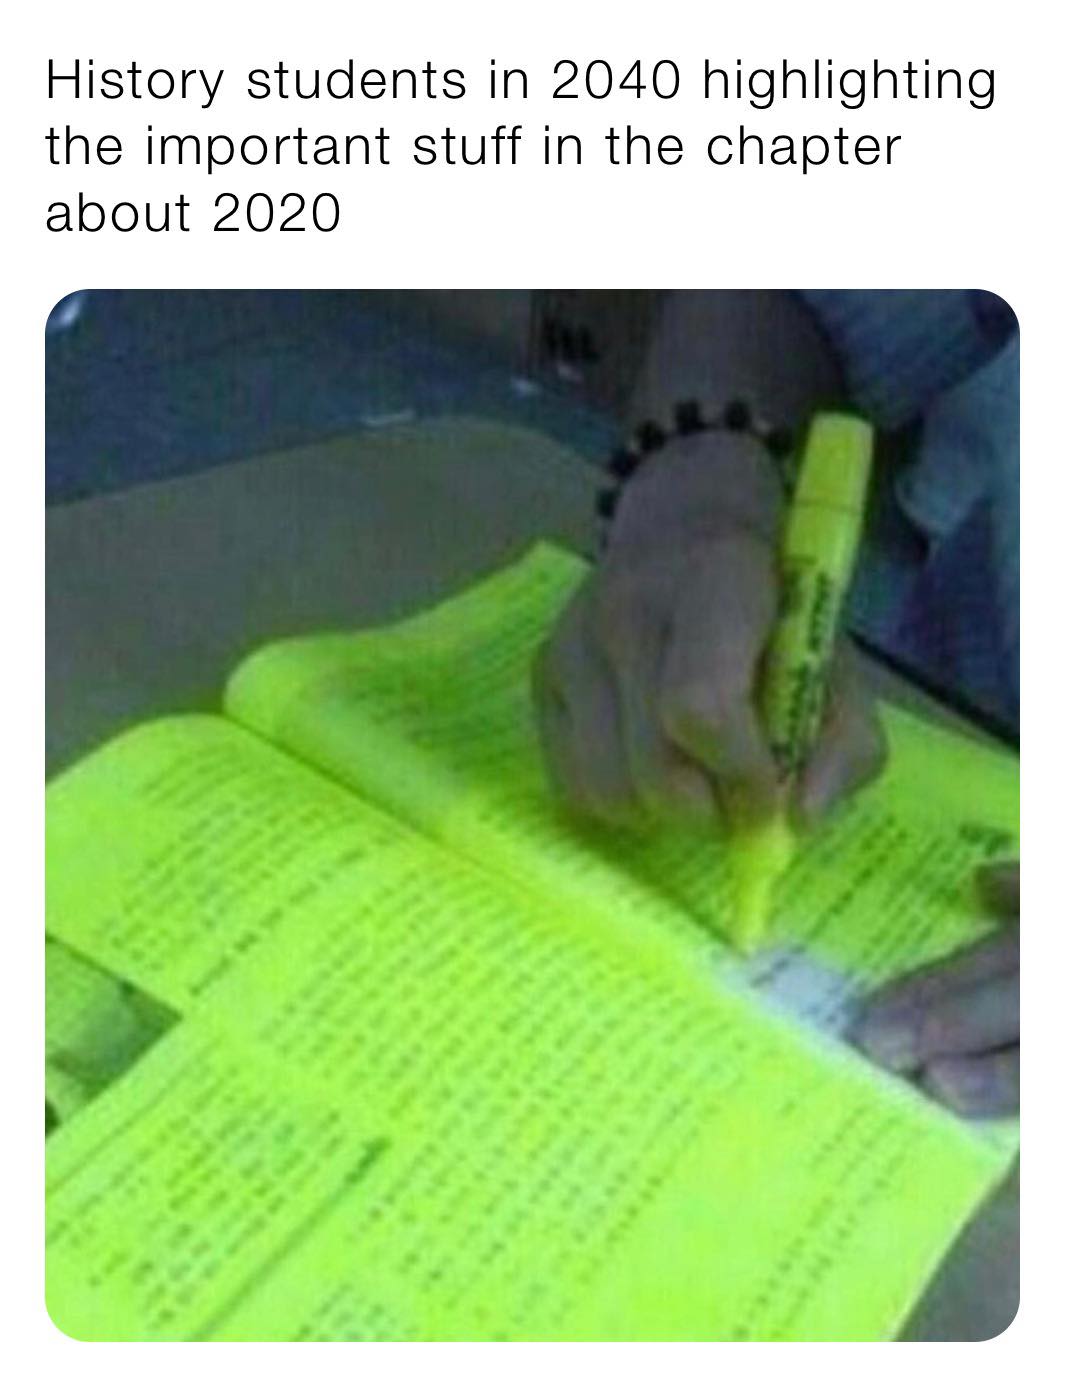 2020 history meme - History students in 2040 highlighting the important stuff in the chapter about 2020